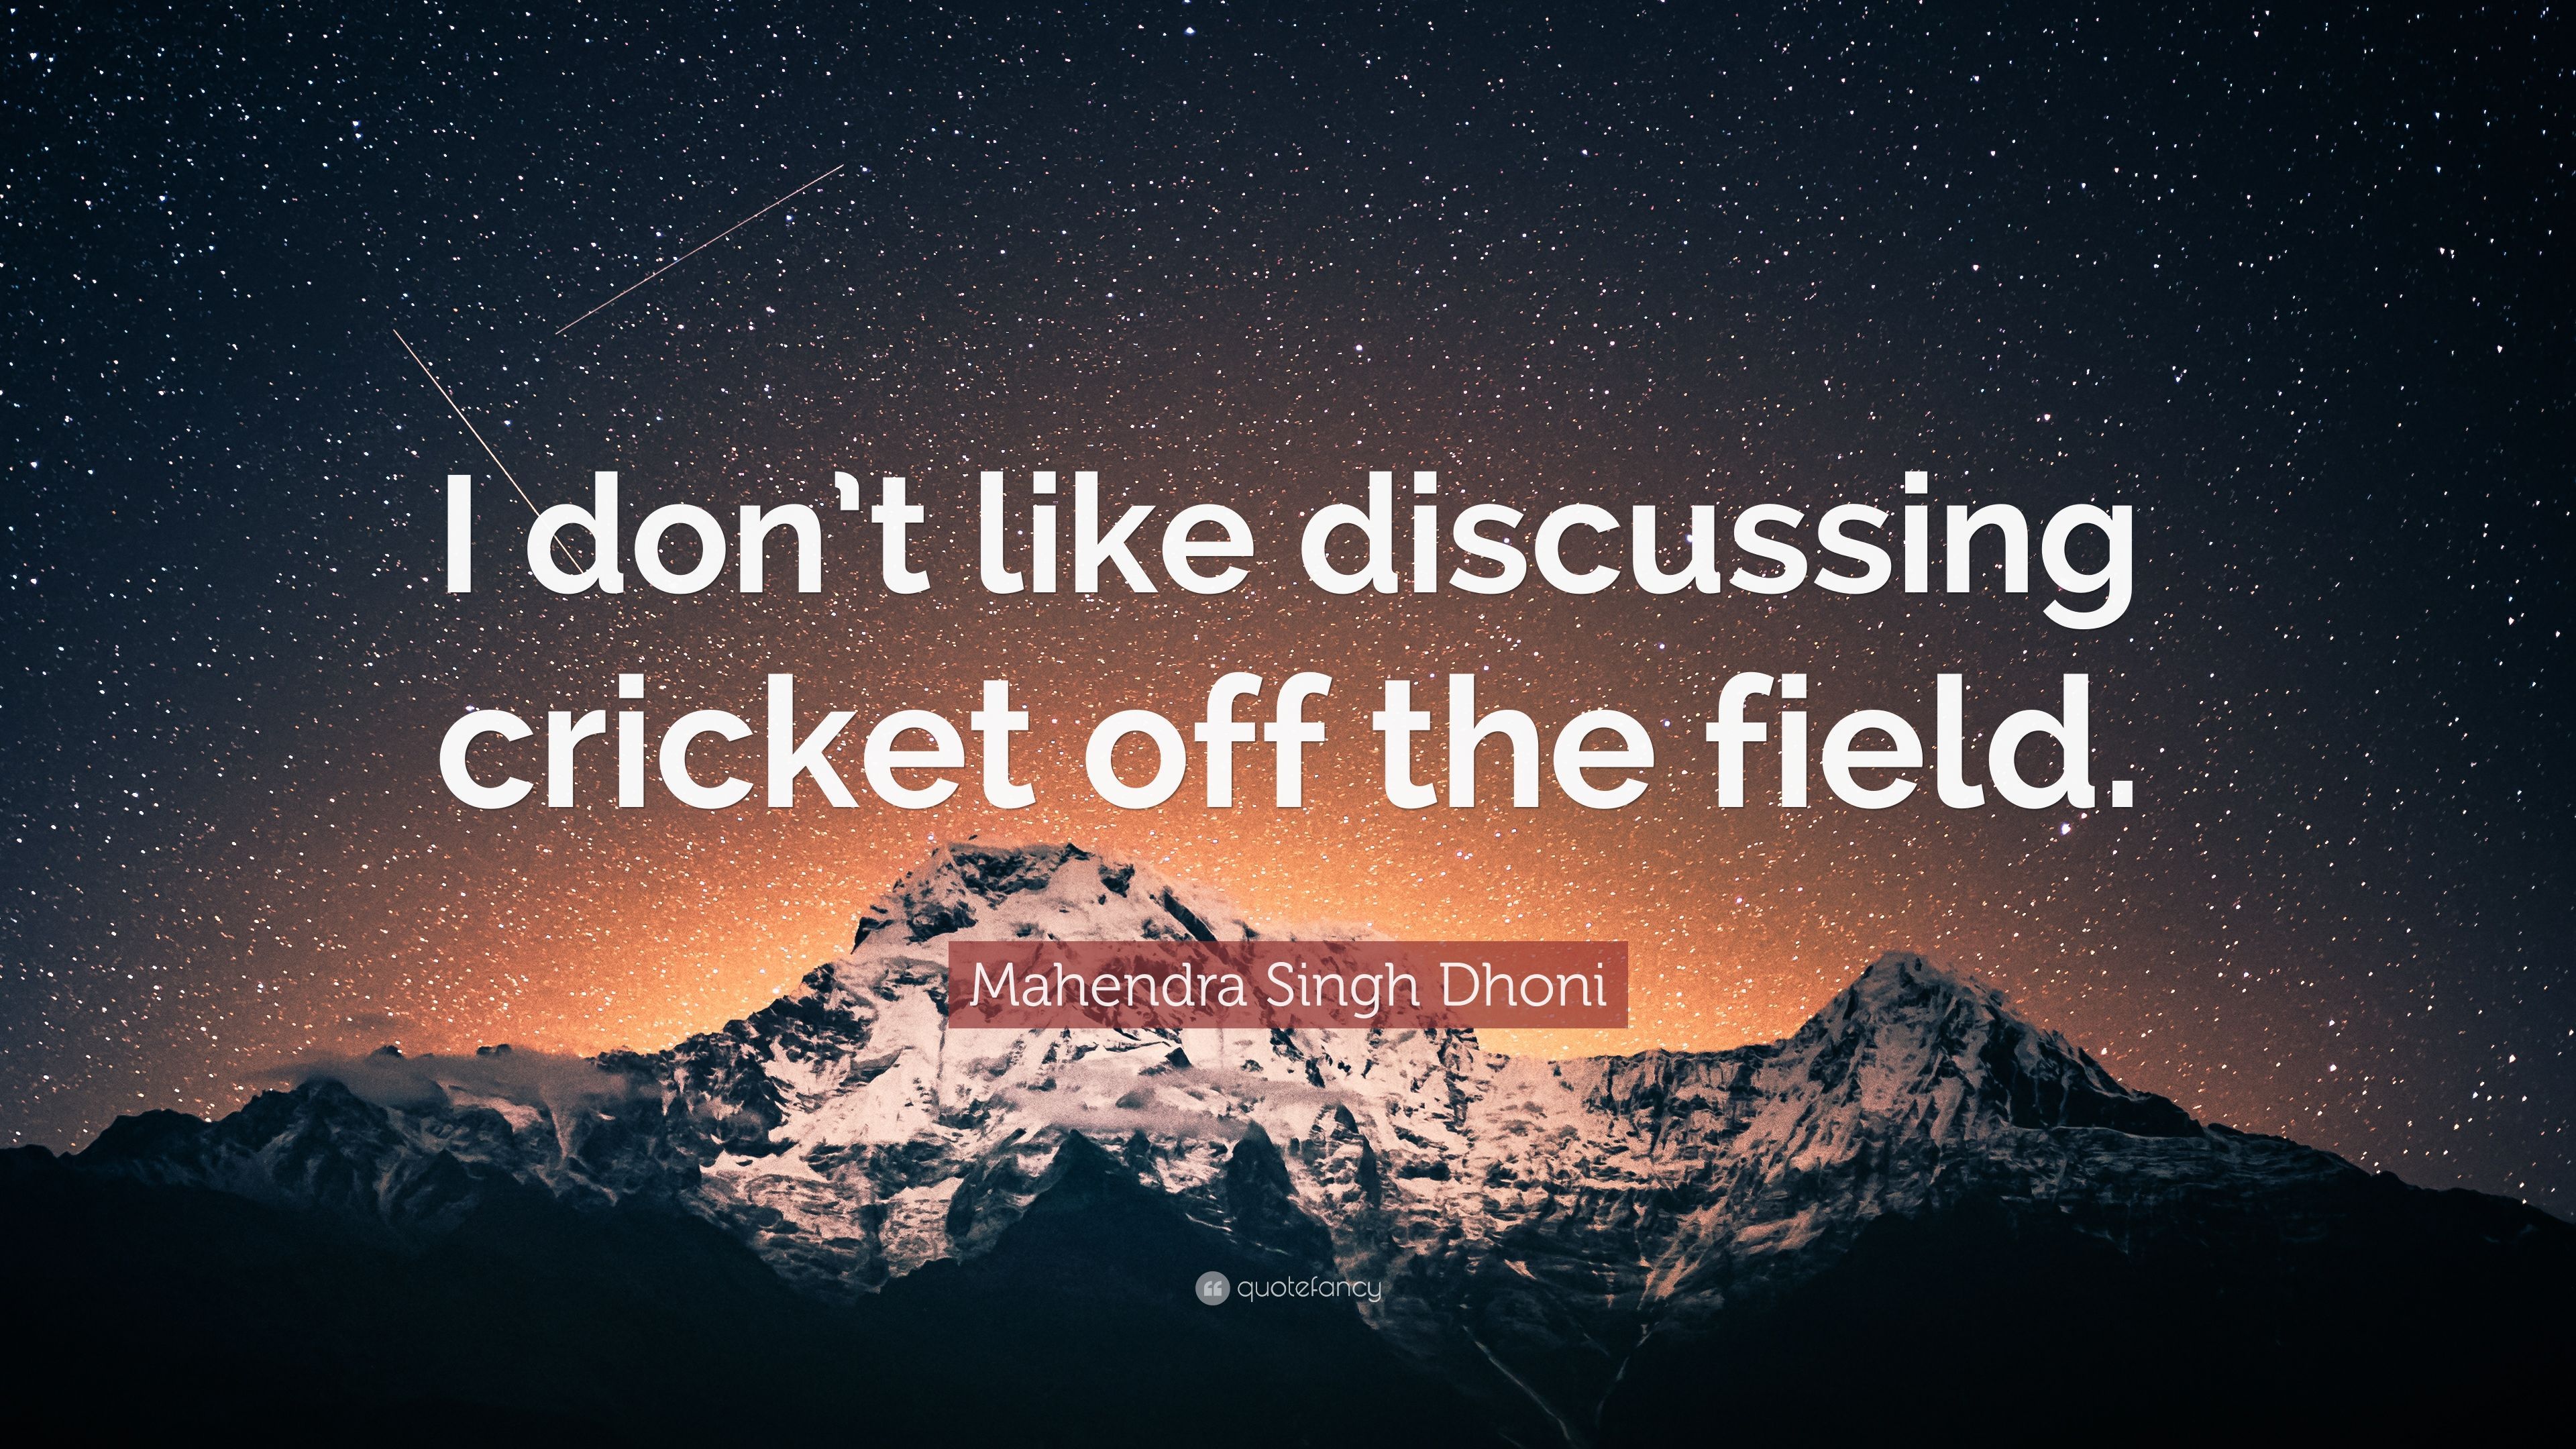 Mahendra Singh Dhoni Quote: “I don't like discussing cricket off